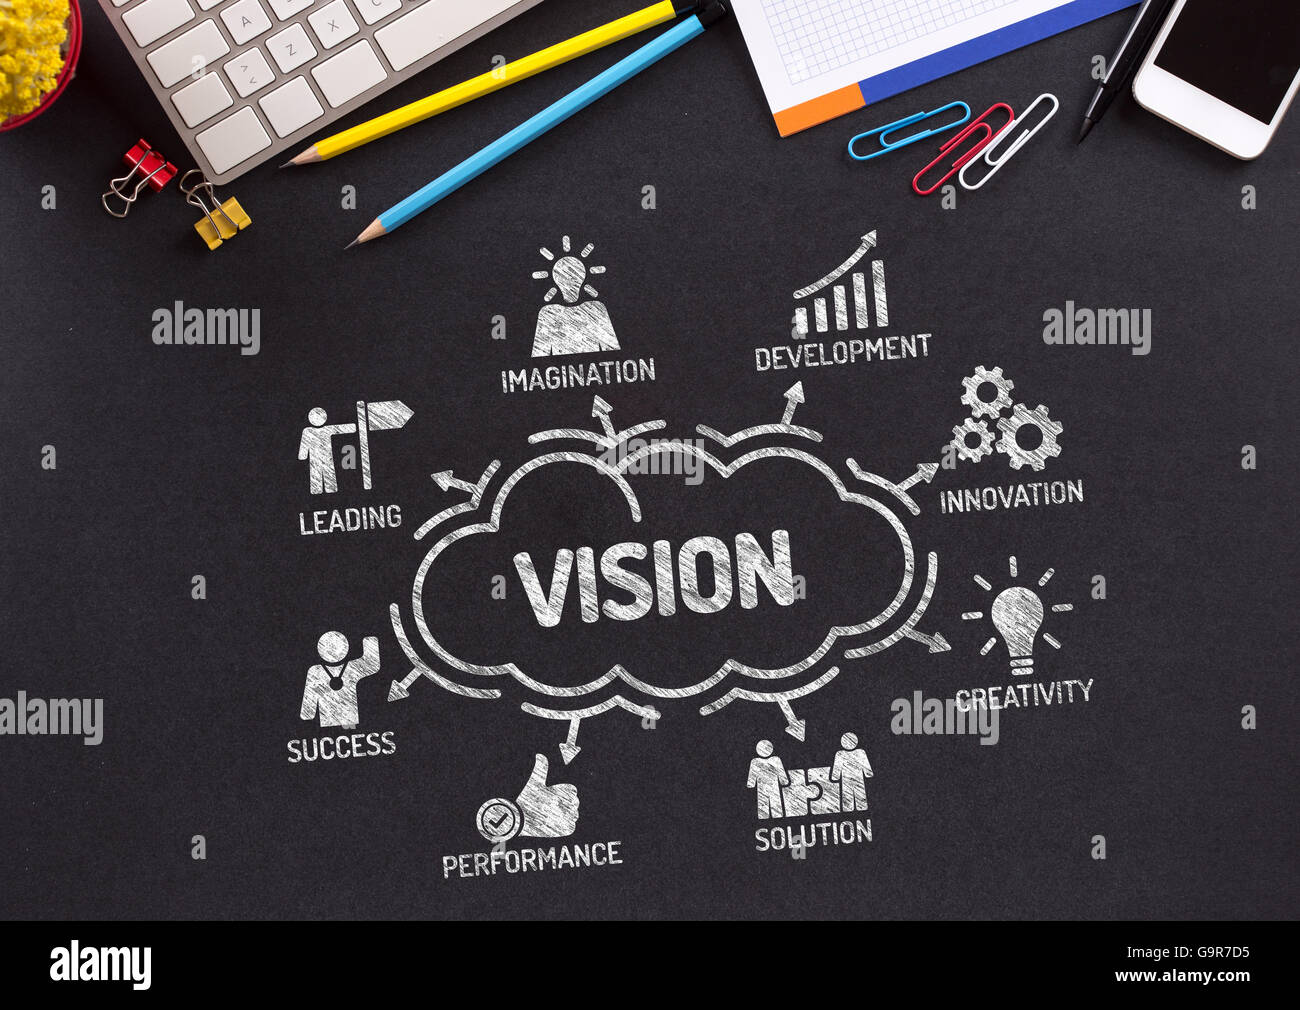 Vision Chart with keywords and icons on blackboard Stock Photo